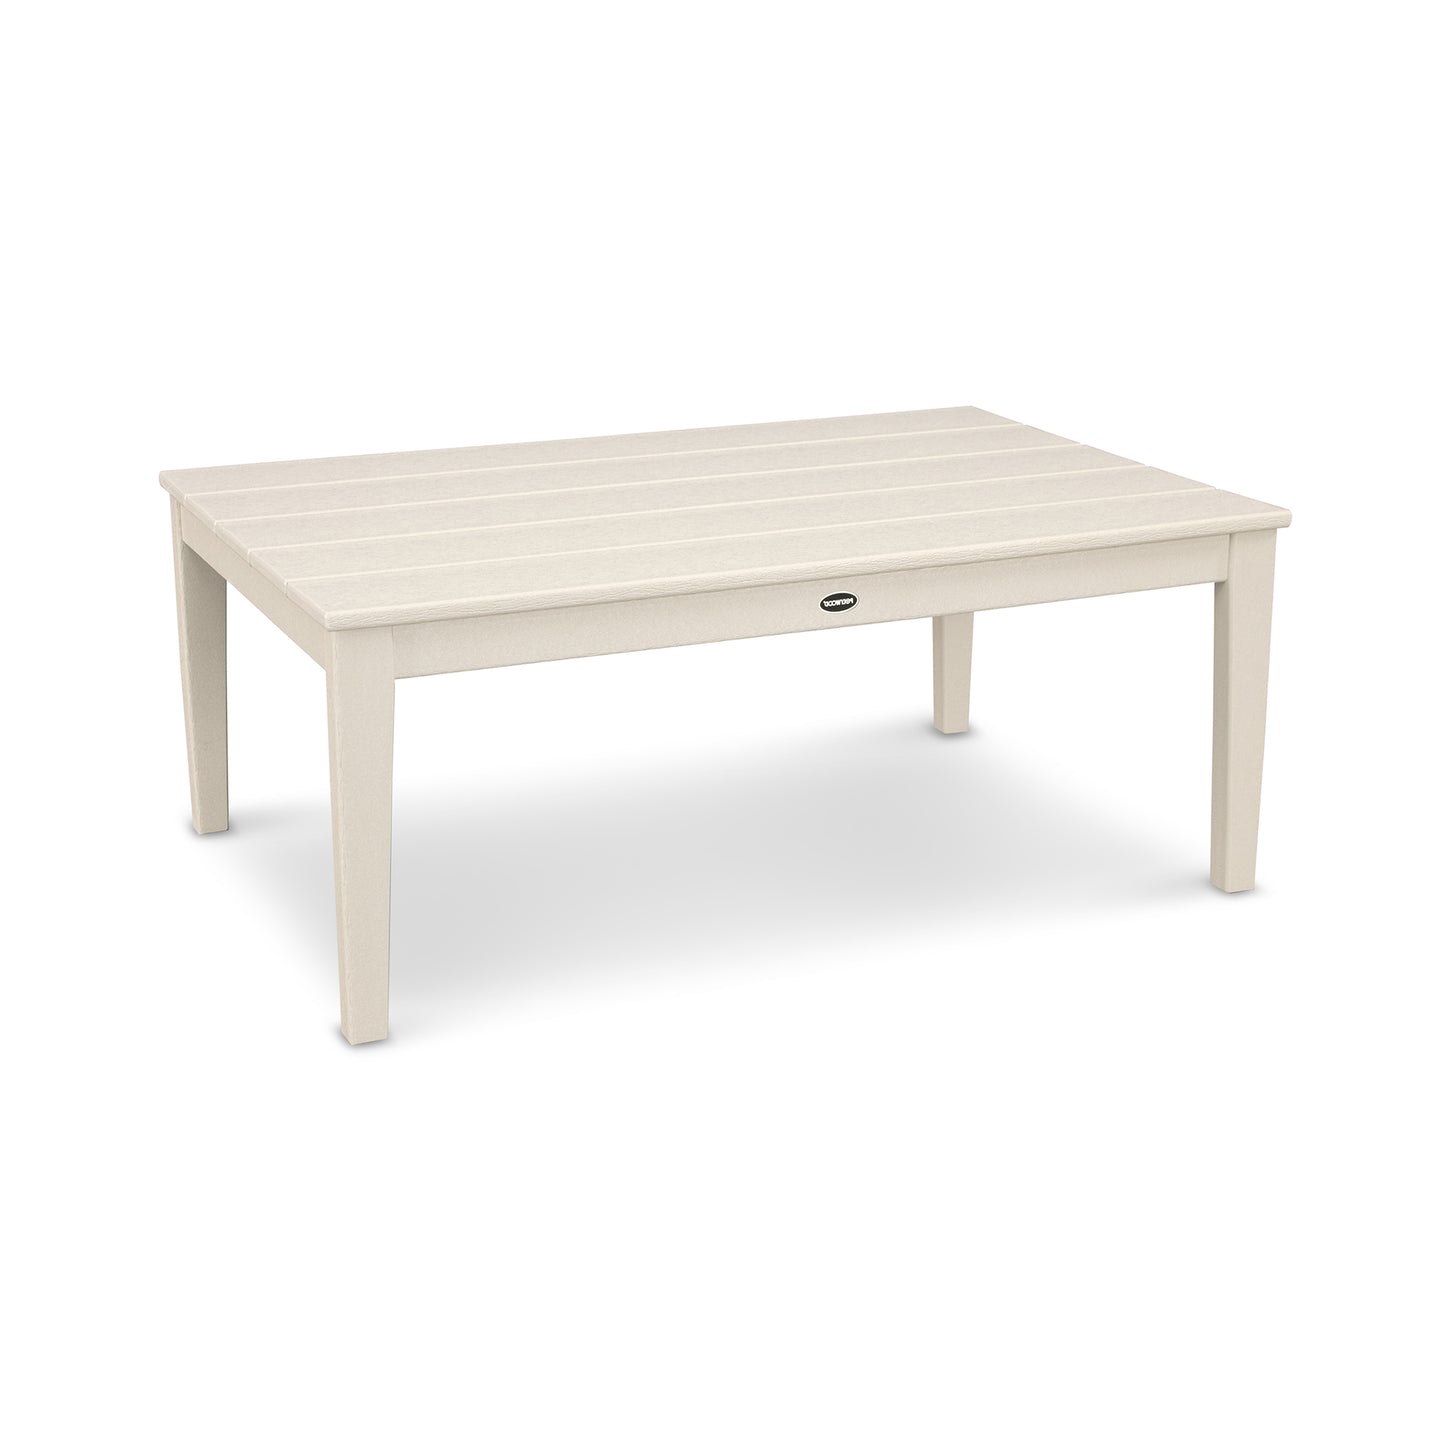 A beige rectangular POLYWOOD® Newport 28" x 42" Coffee Table outdoor table with a slatted top and four legs, featuring a small, round umbrella hole in the center, set against a white background.